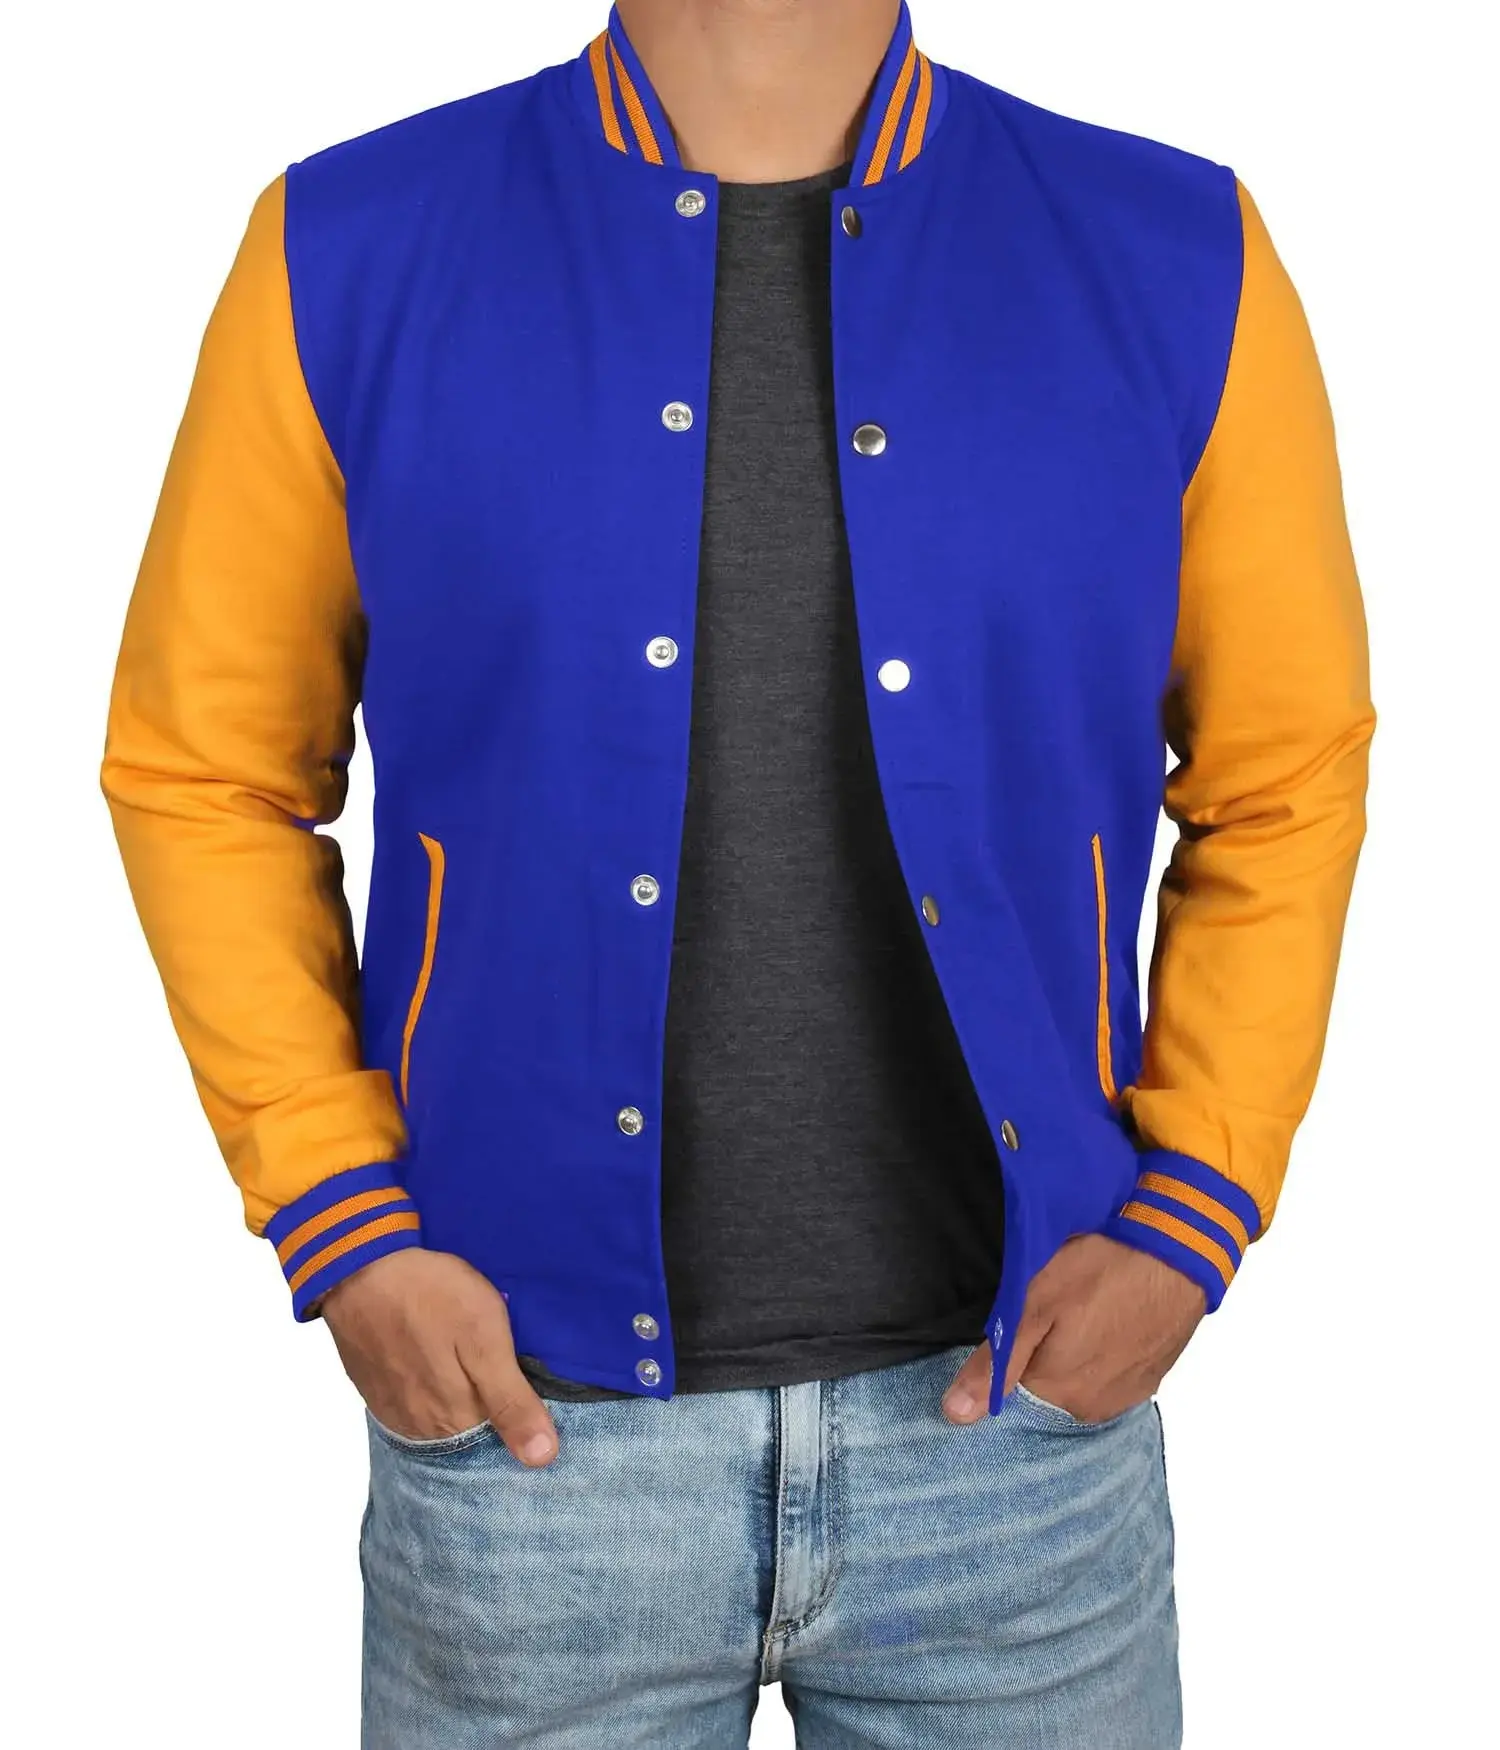 blue-yellow-quilted-varsity-jacket-for-mens